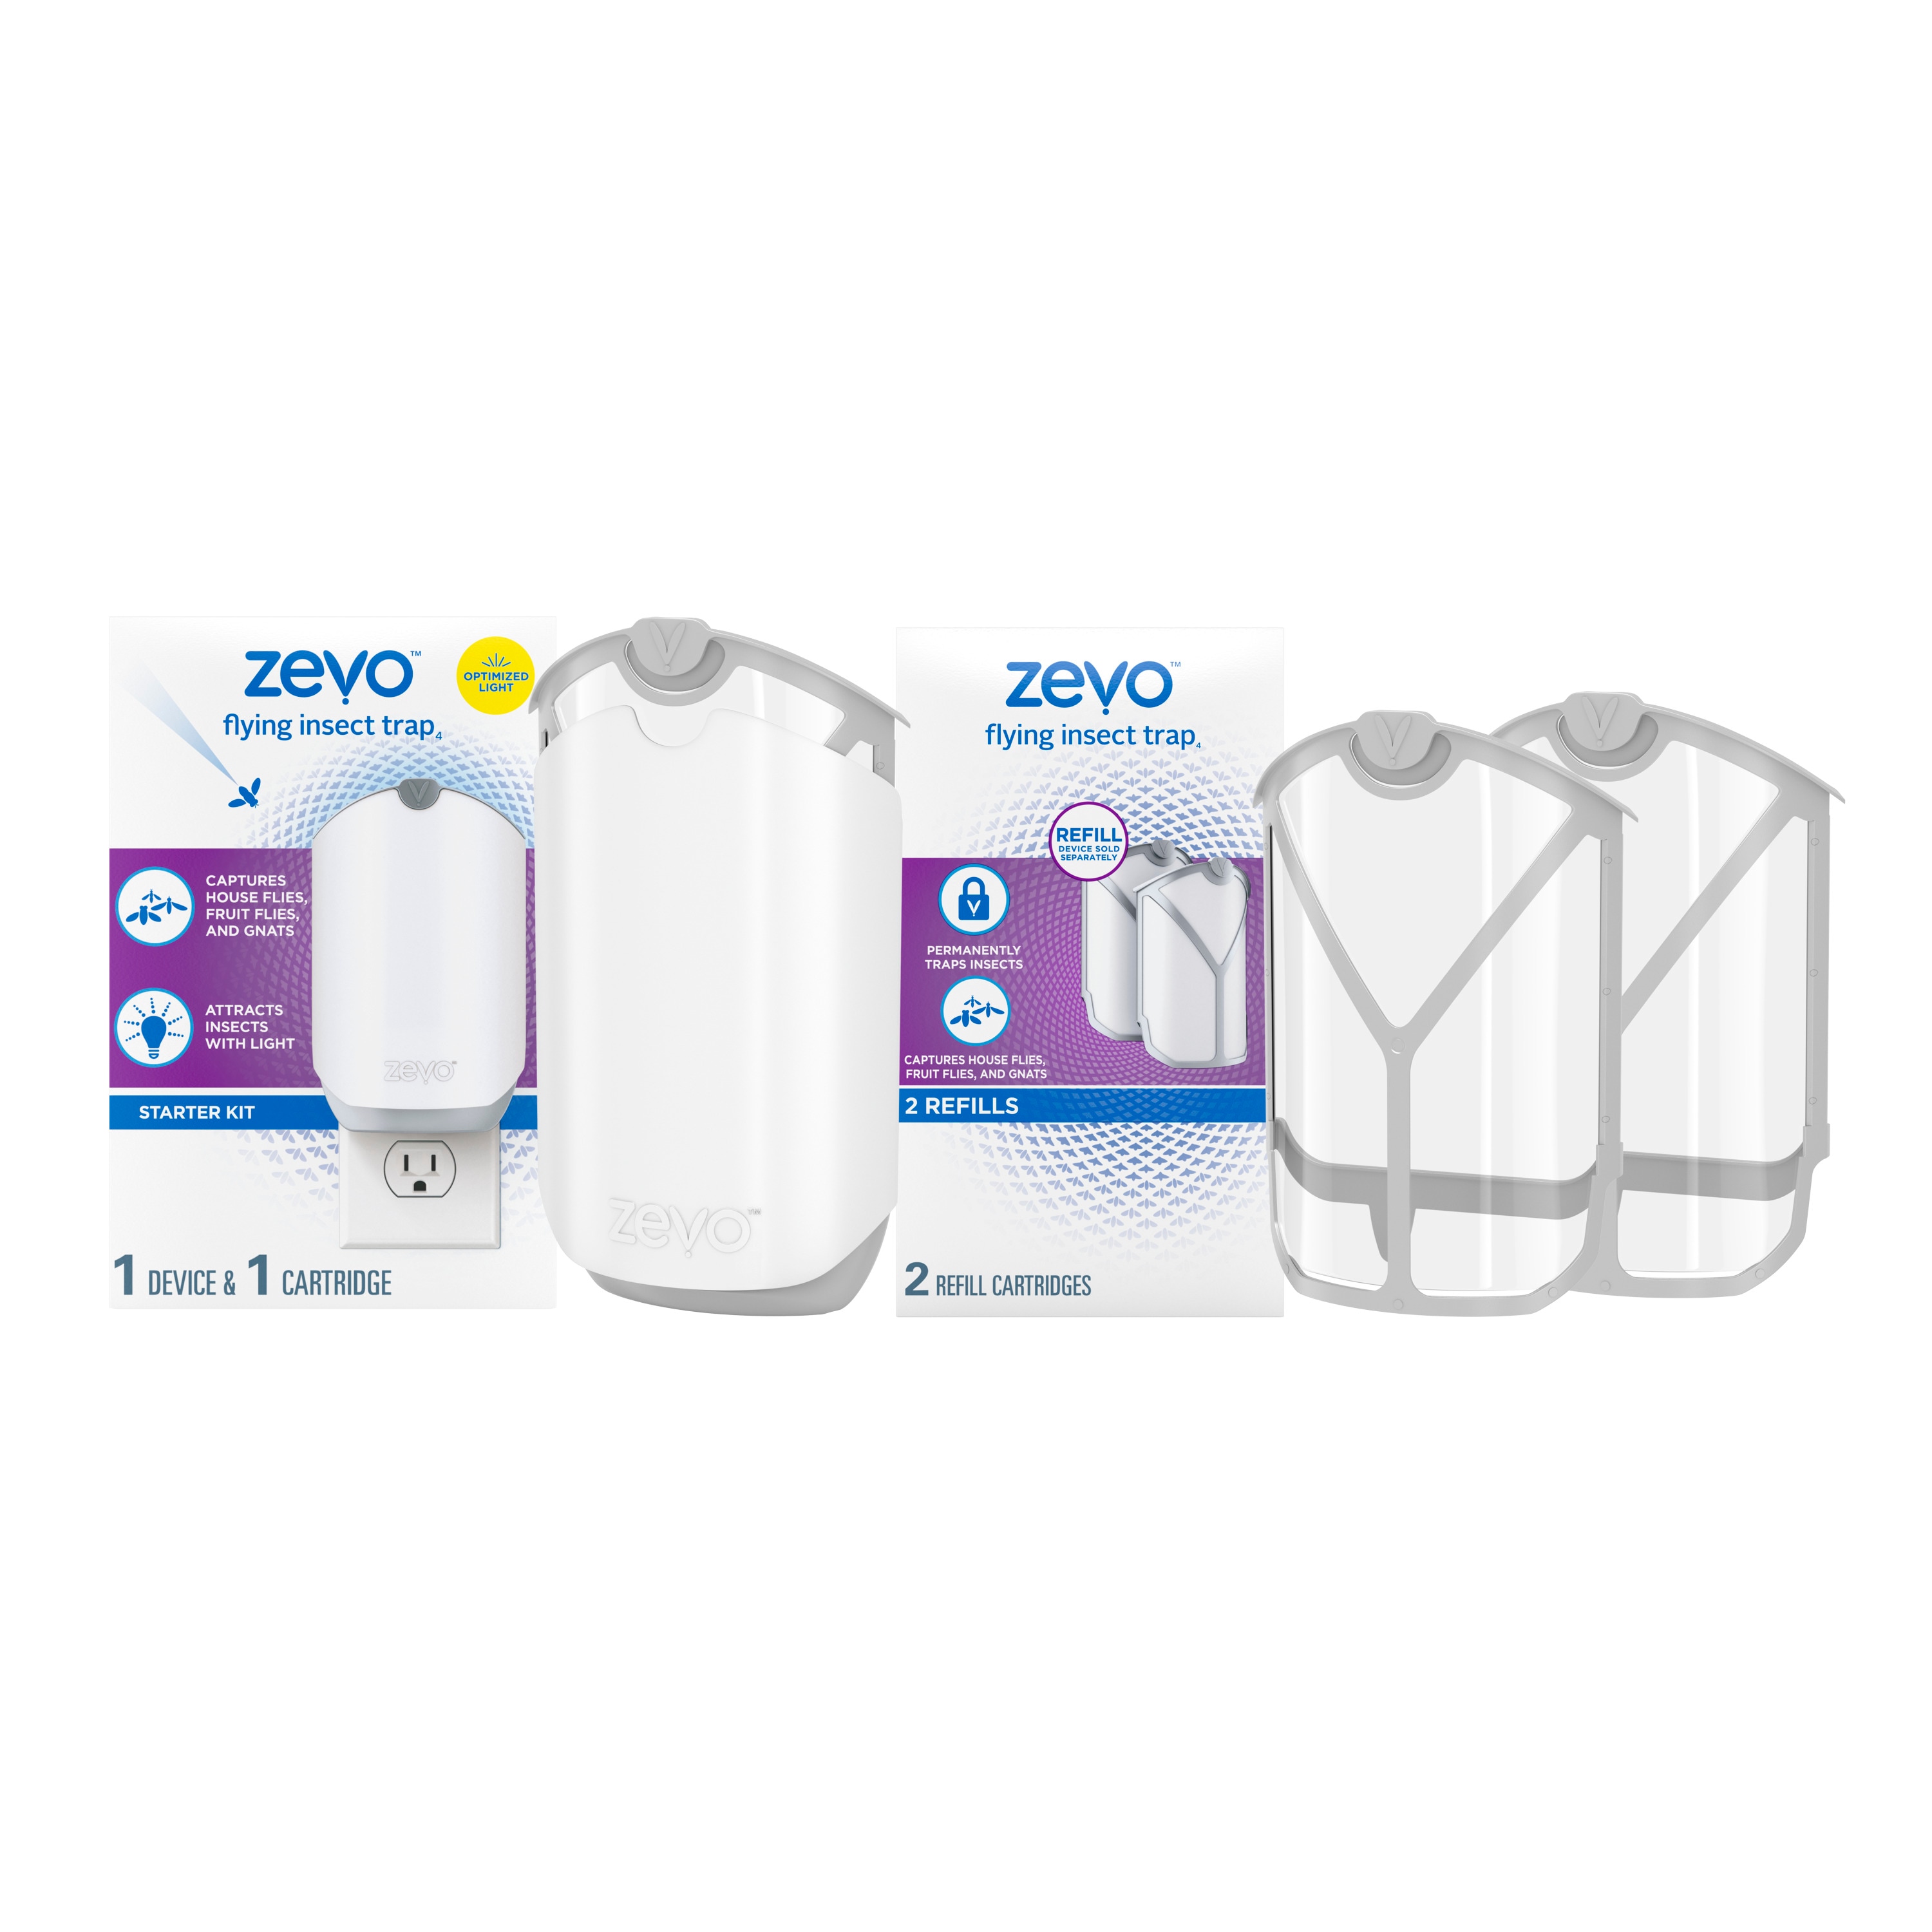 Zevo Flying Insect Trap Refill Cartridges (2-Pack) for Fruit Flies